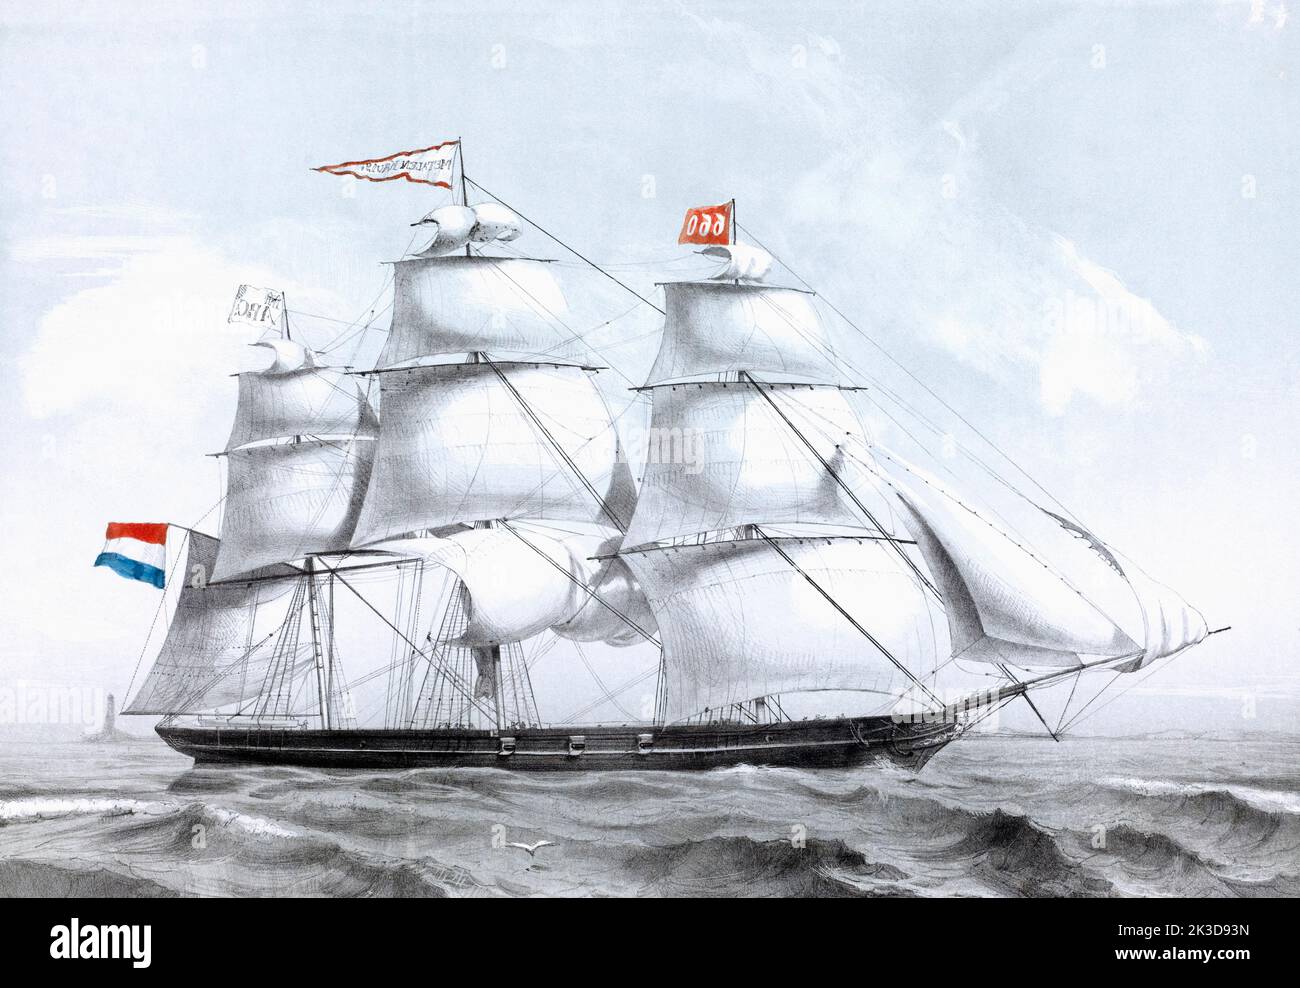 The Dutch clipper Metalen Kruis under full sail.  After a work by Charles Binger published in 1856. Stock Photo